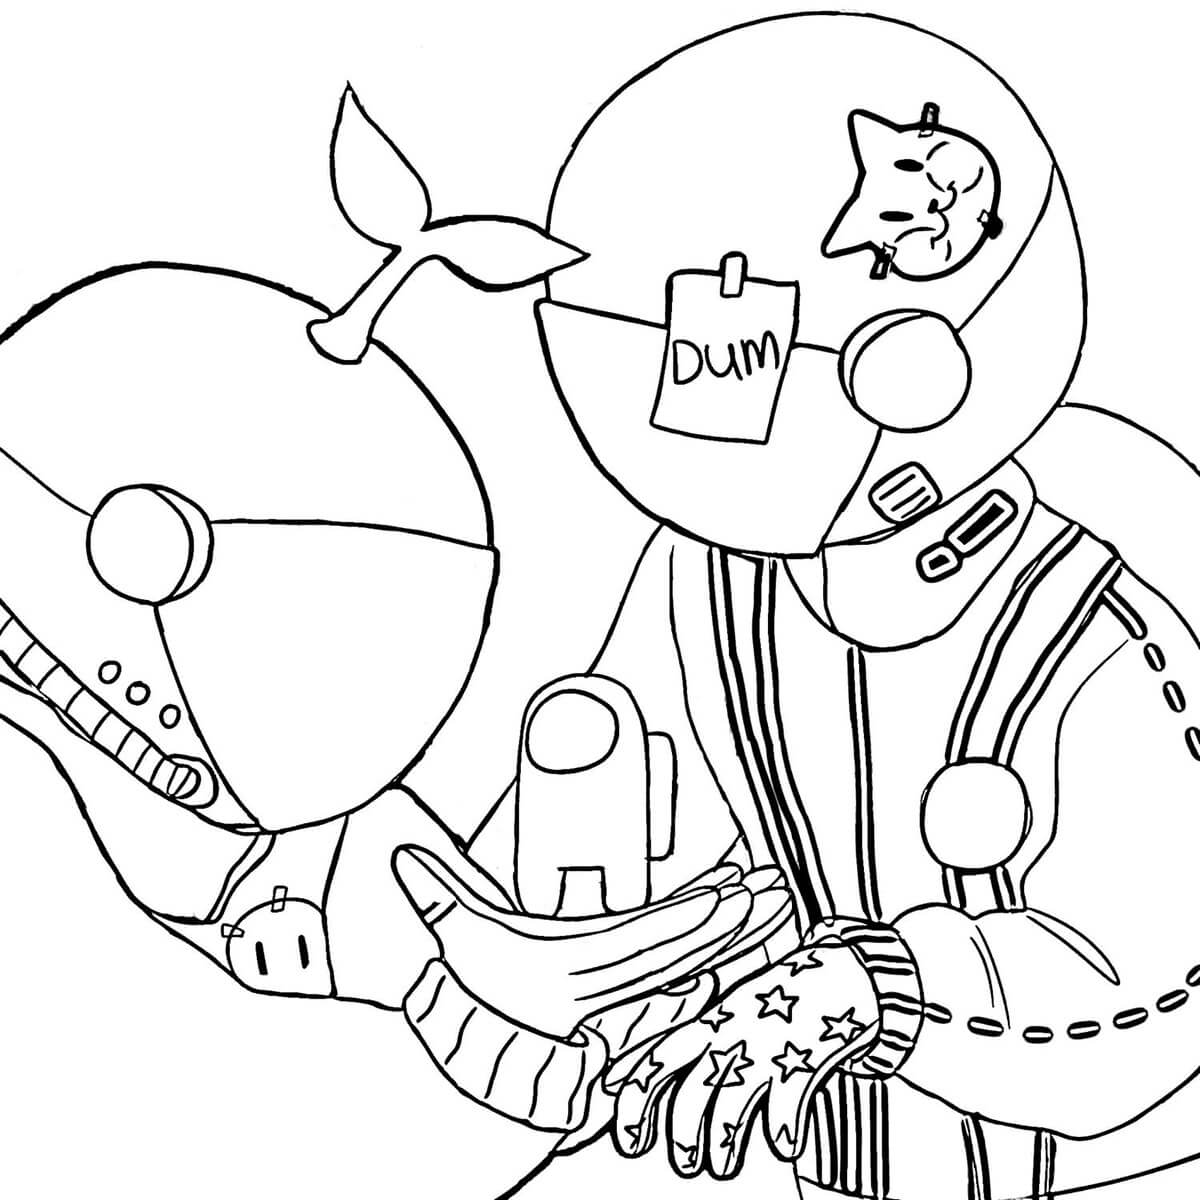 Among Us 39 Coloring Page Free Printable Coloring Pages for Kids